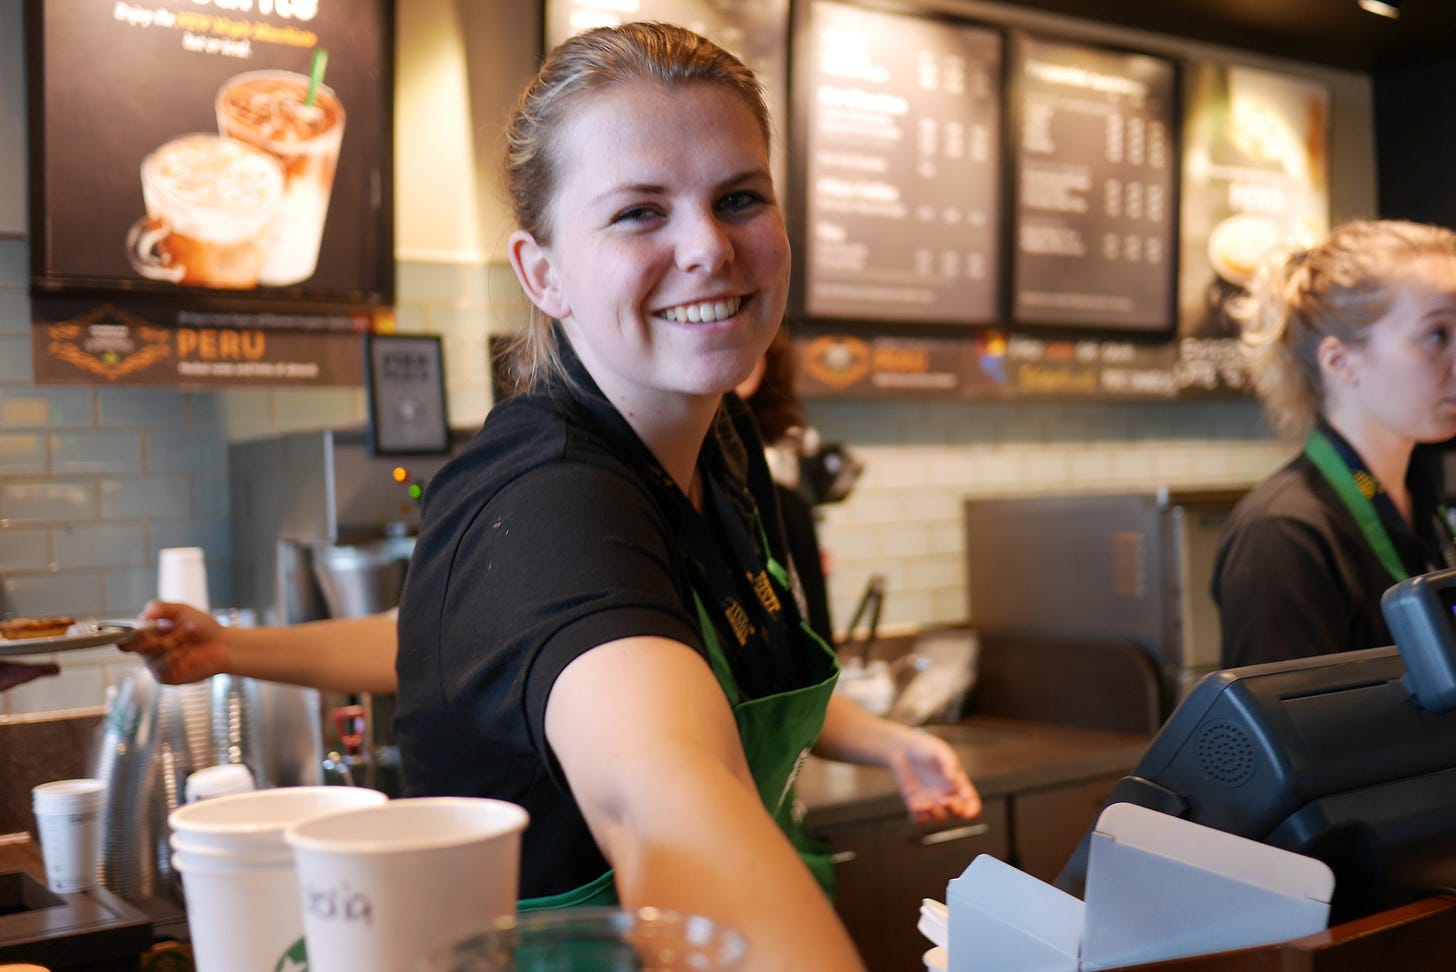 A Starbucks barista smiles as she hands over a coffee.